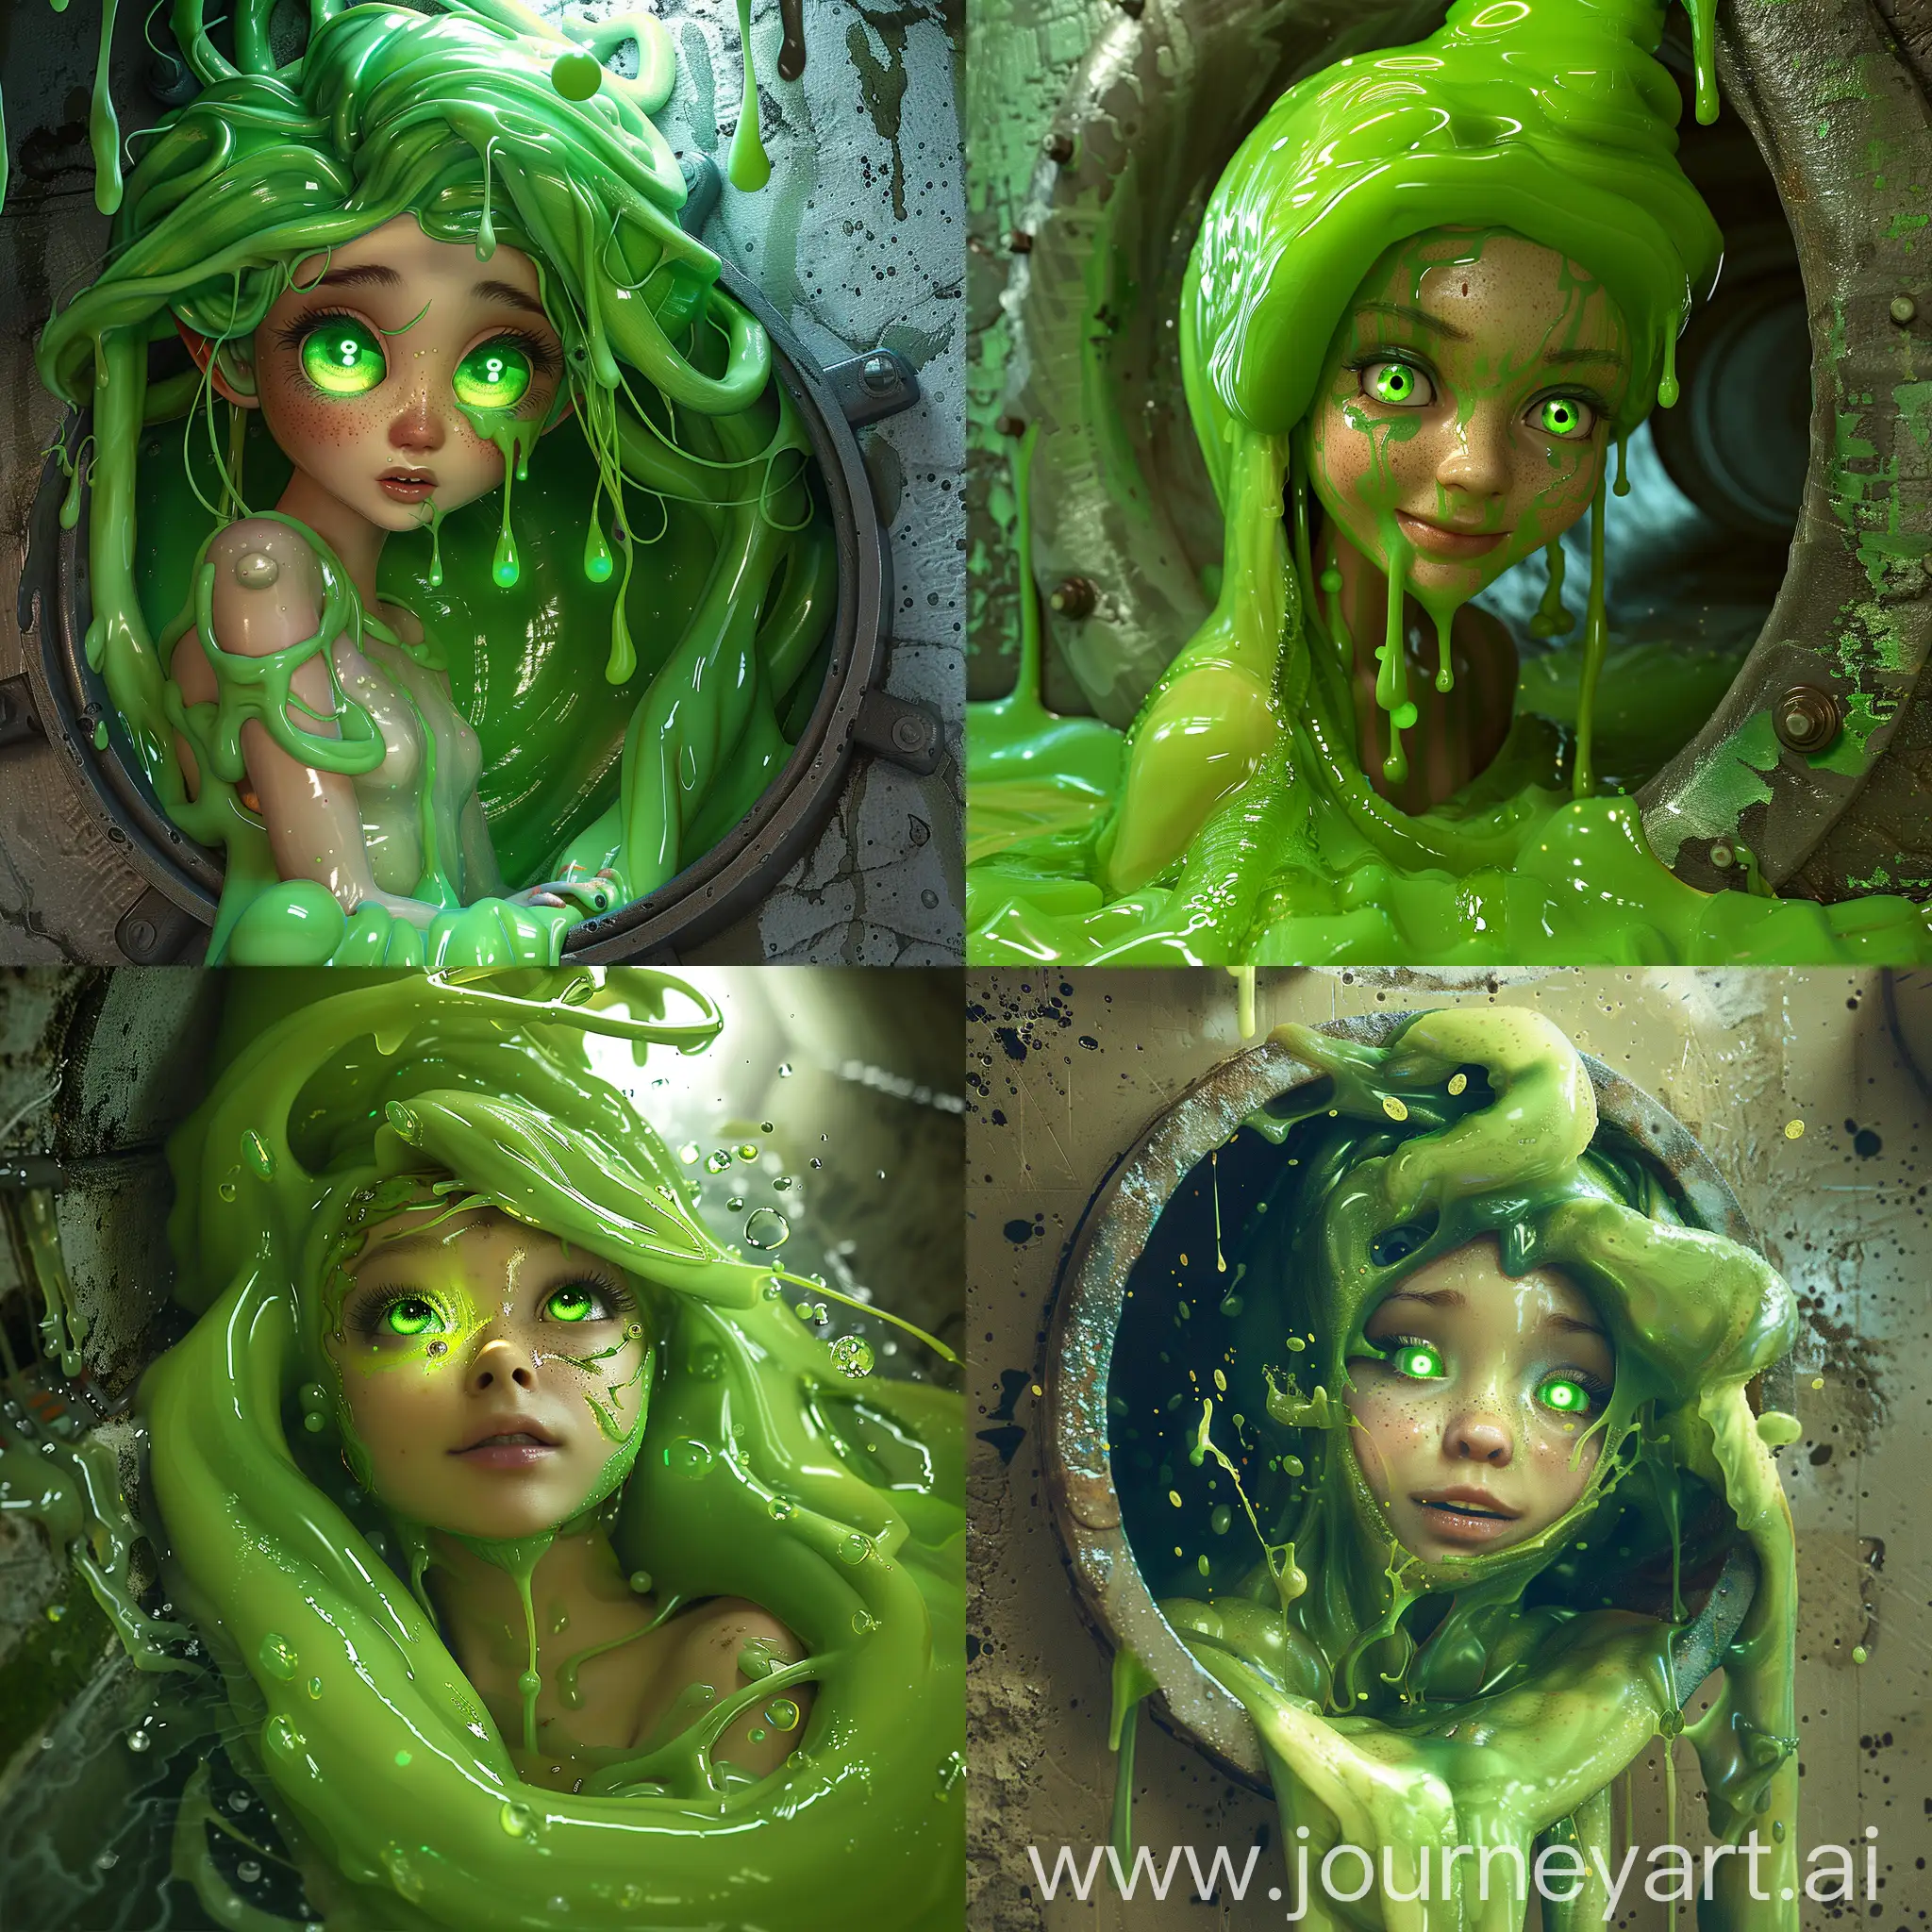 Fantasy-Slime-Girl-Emerges-from-Sewer-Enchanting-Steampunk-Creature-in-Detailed-8K-Anime-Style